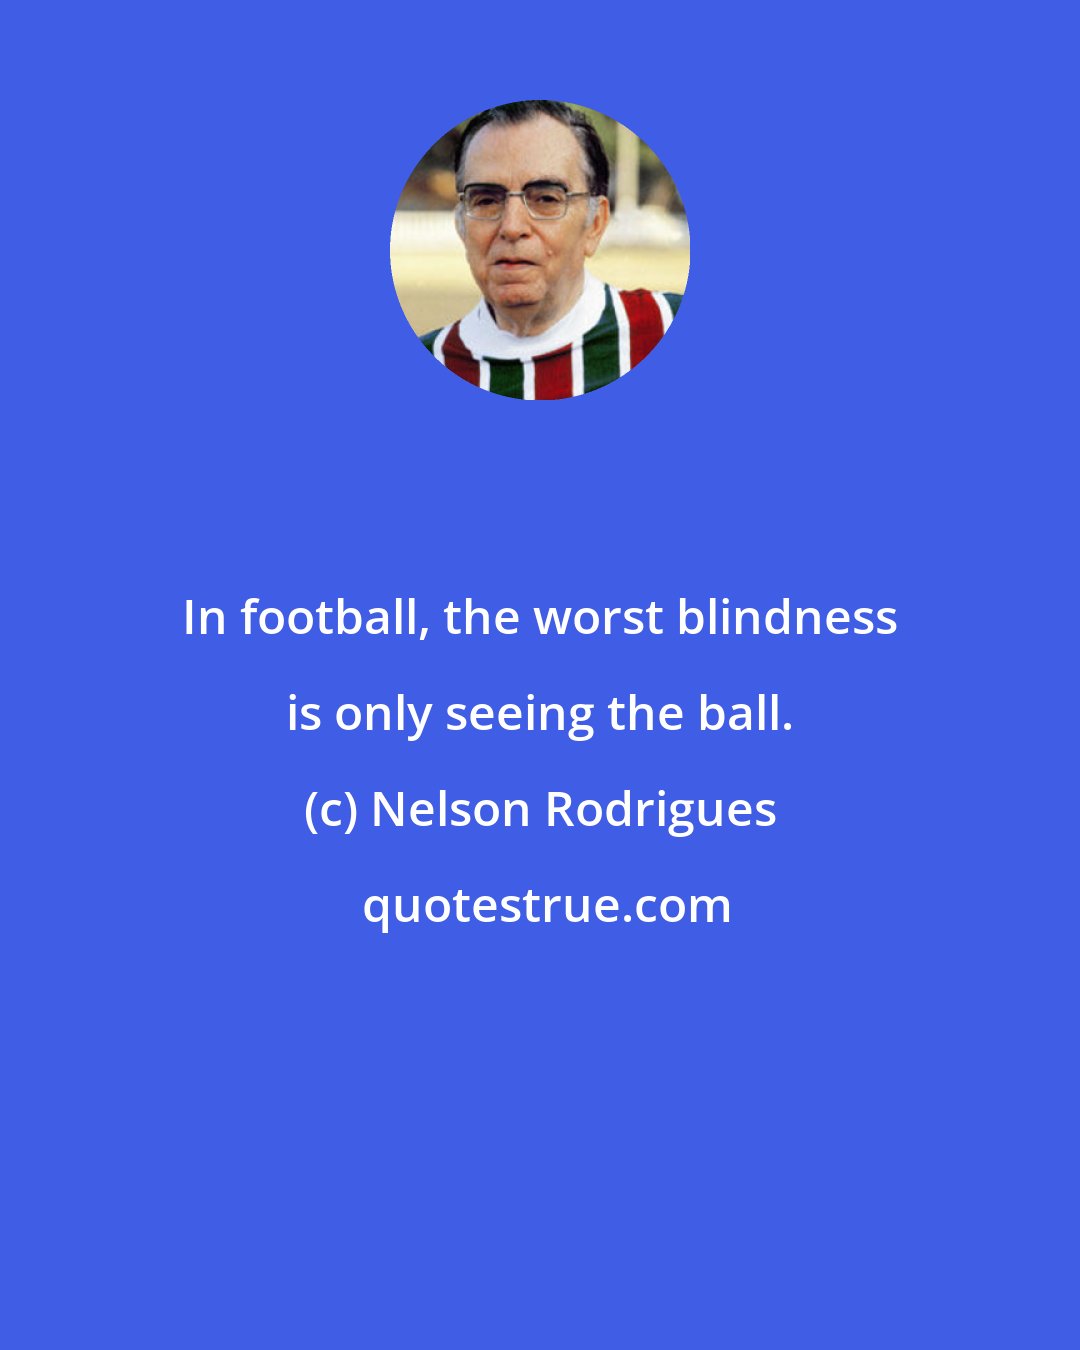 Nelson Rodrigues: In football, the worst blindness is only seeing the ball.